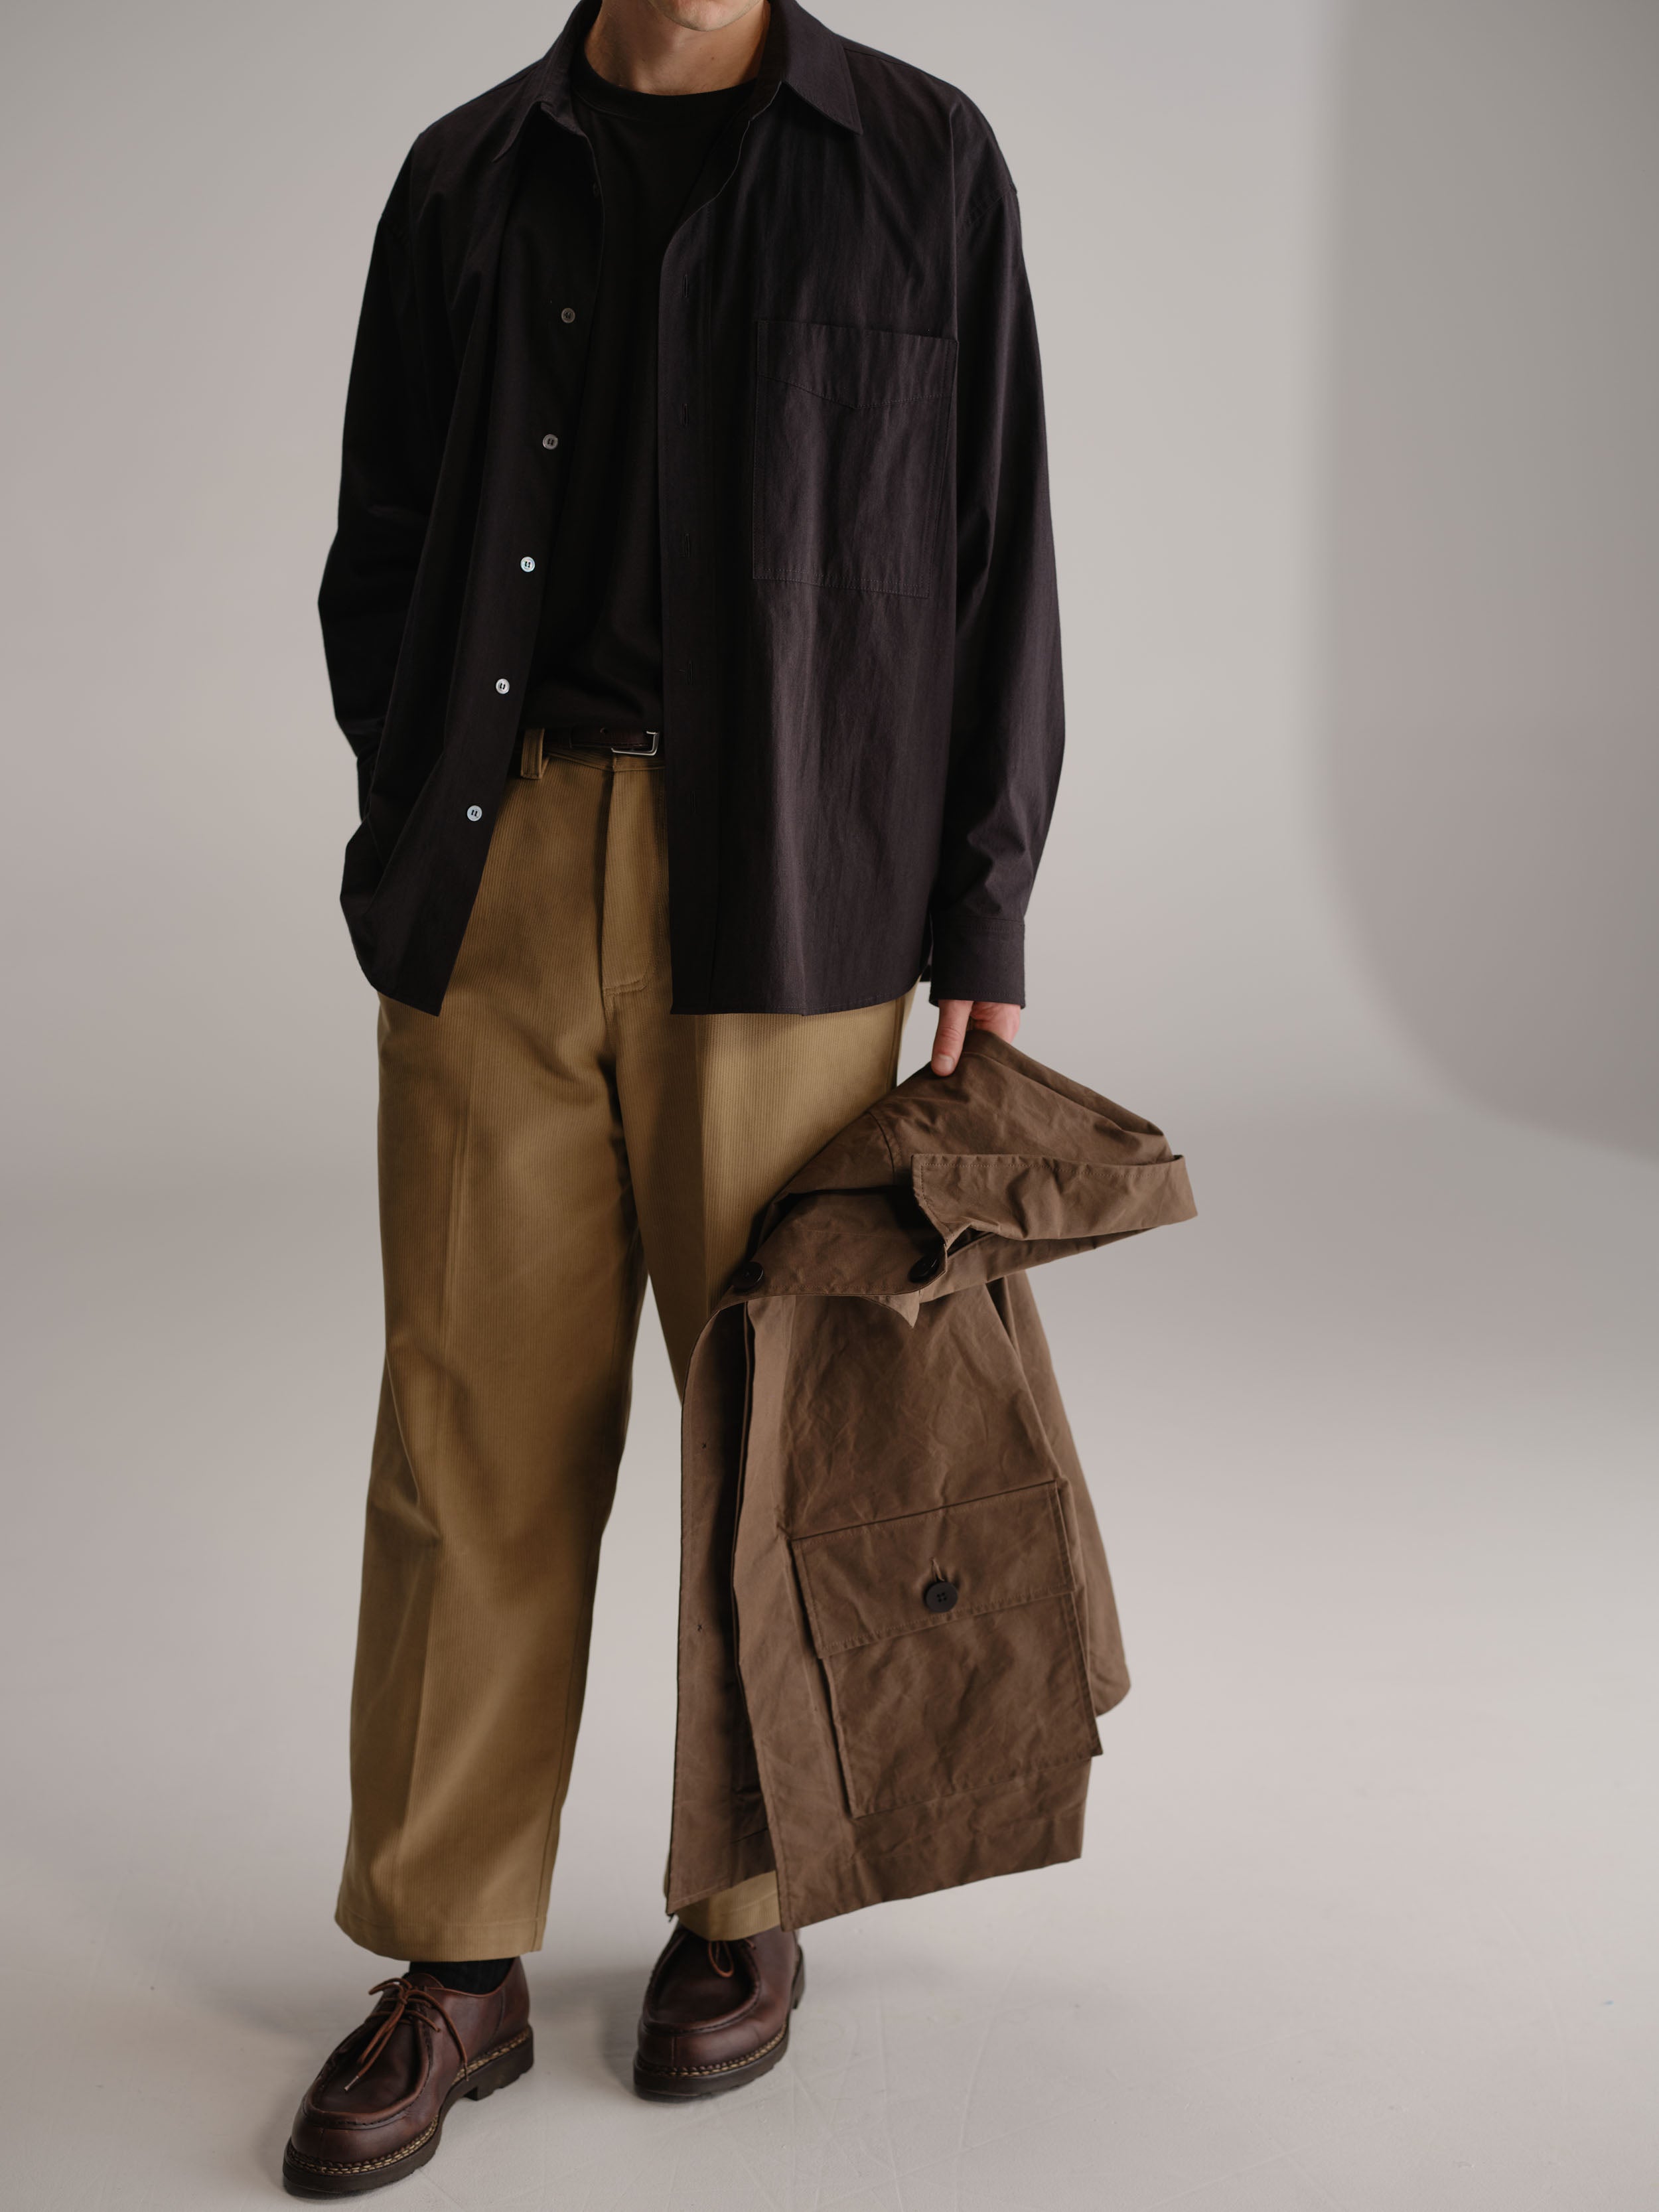 Man standing in white studio holding brown coat wearing black shirt, tucked in black t-shirt and fawn pant.